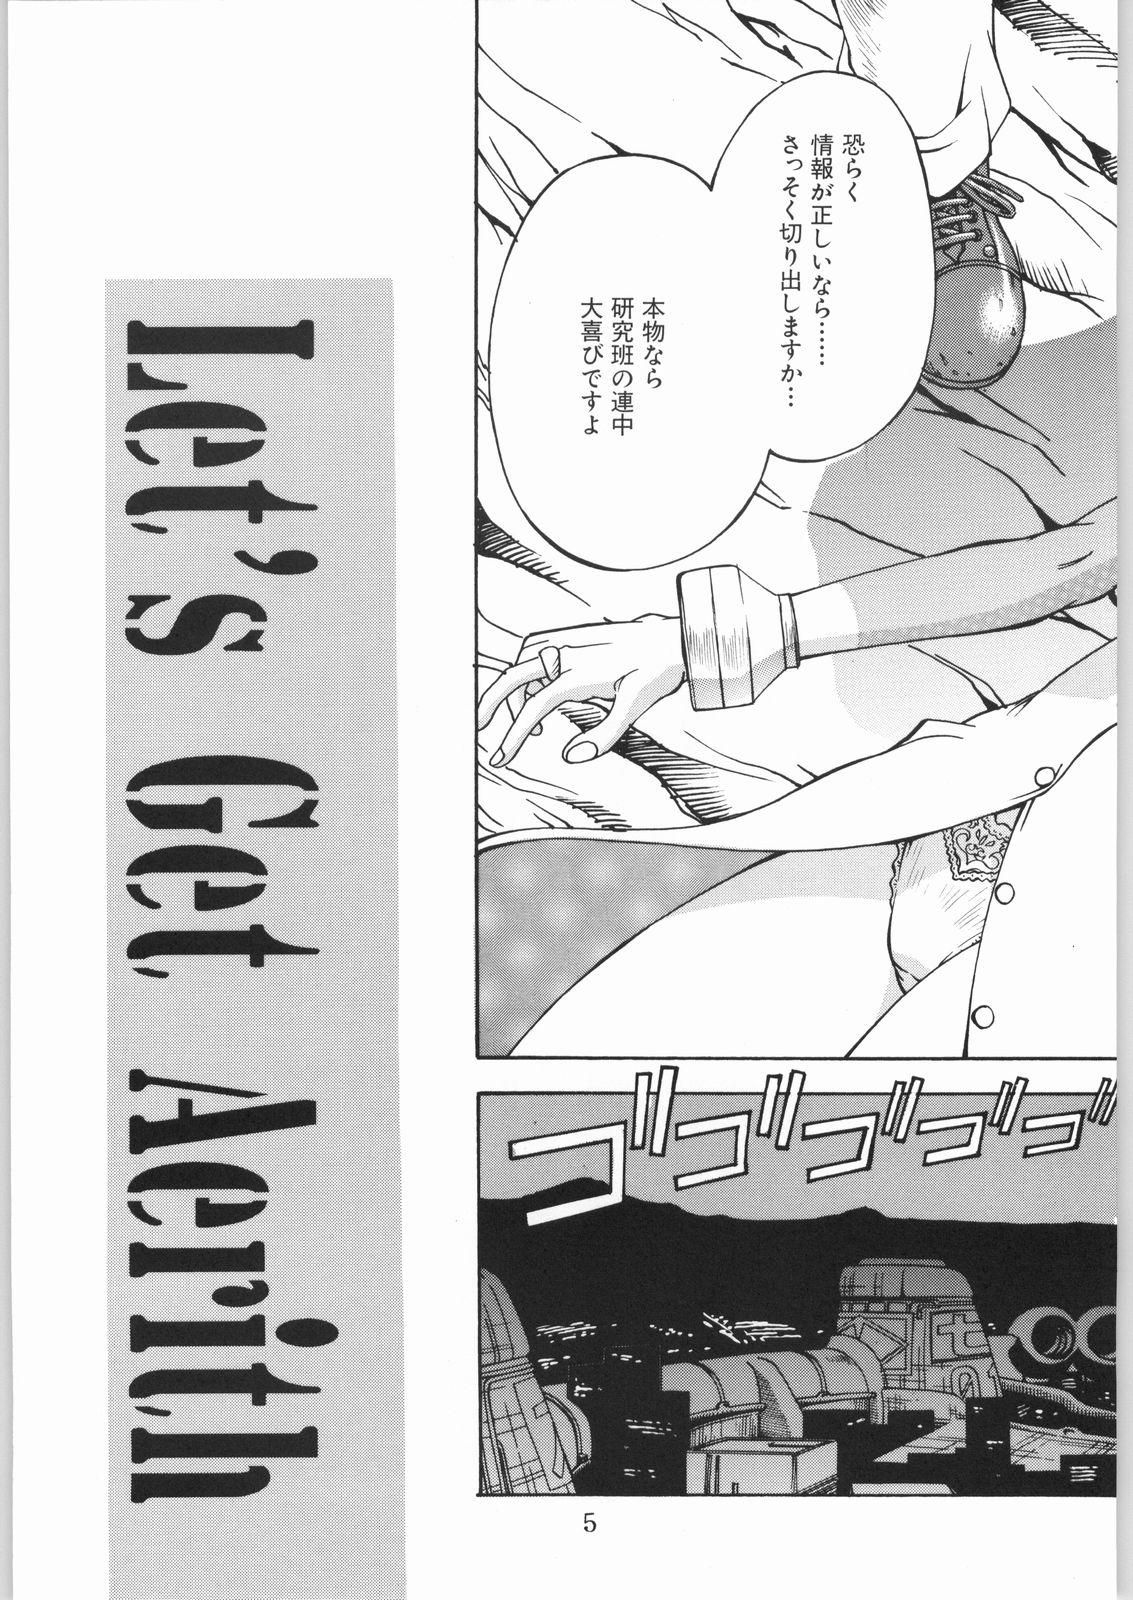 Load L.G.A. - Final fantasy vii Stockings - Page 4